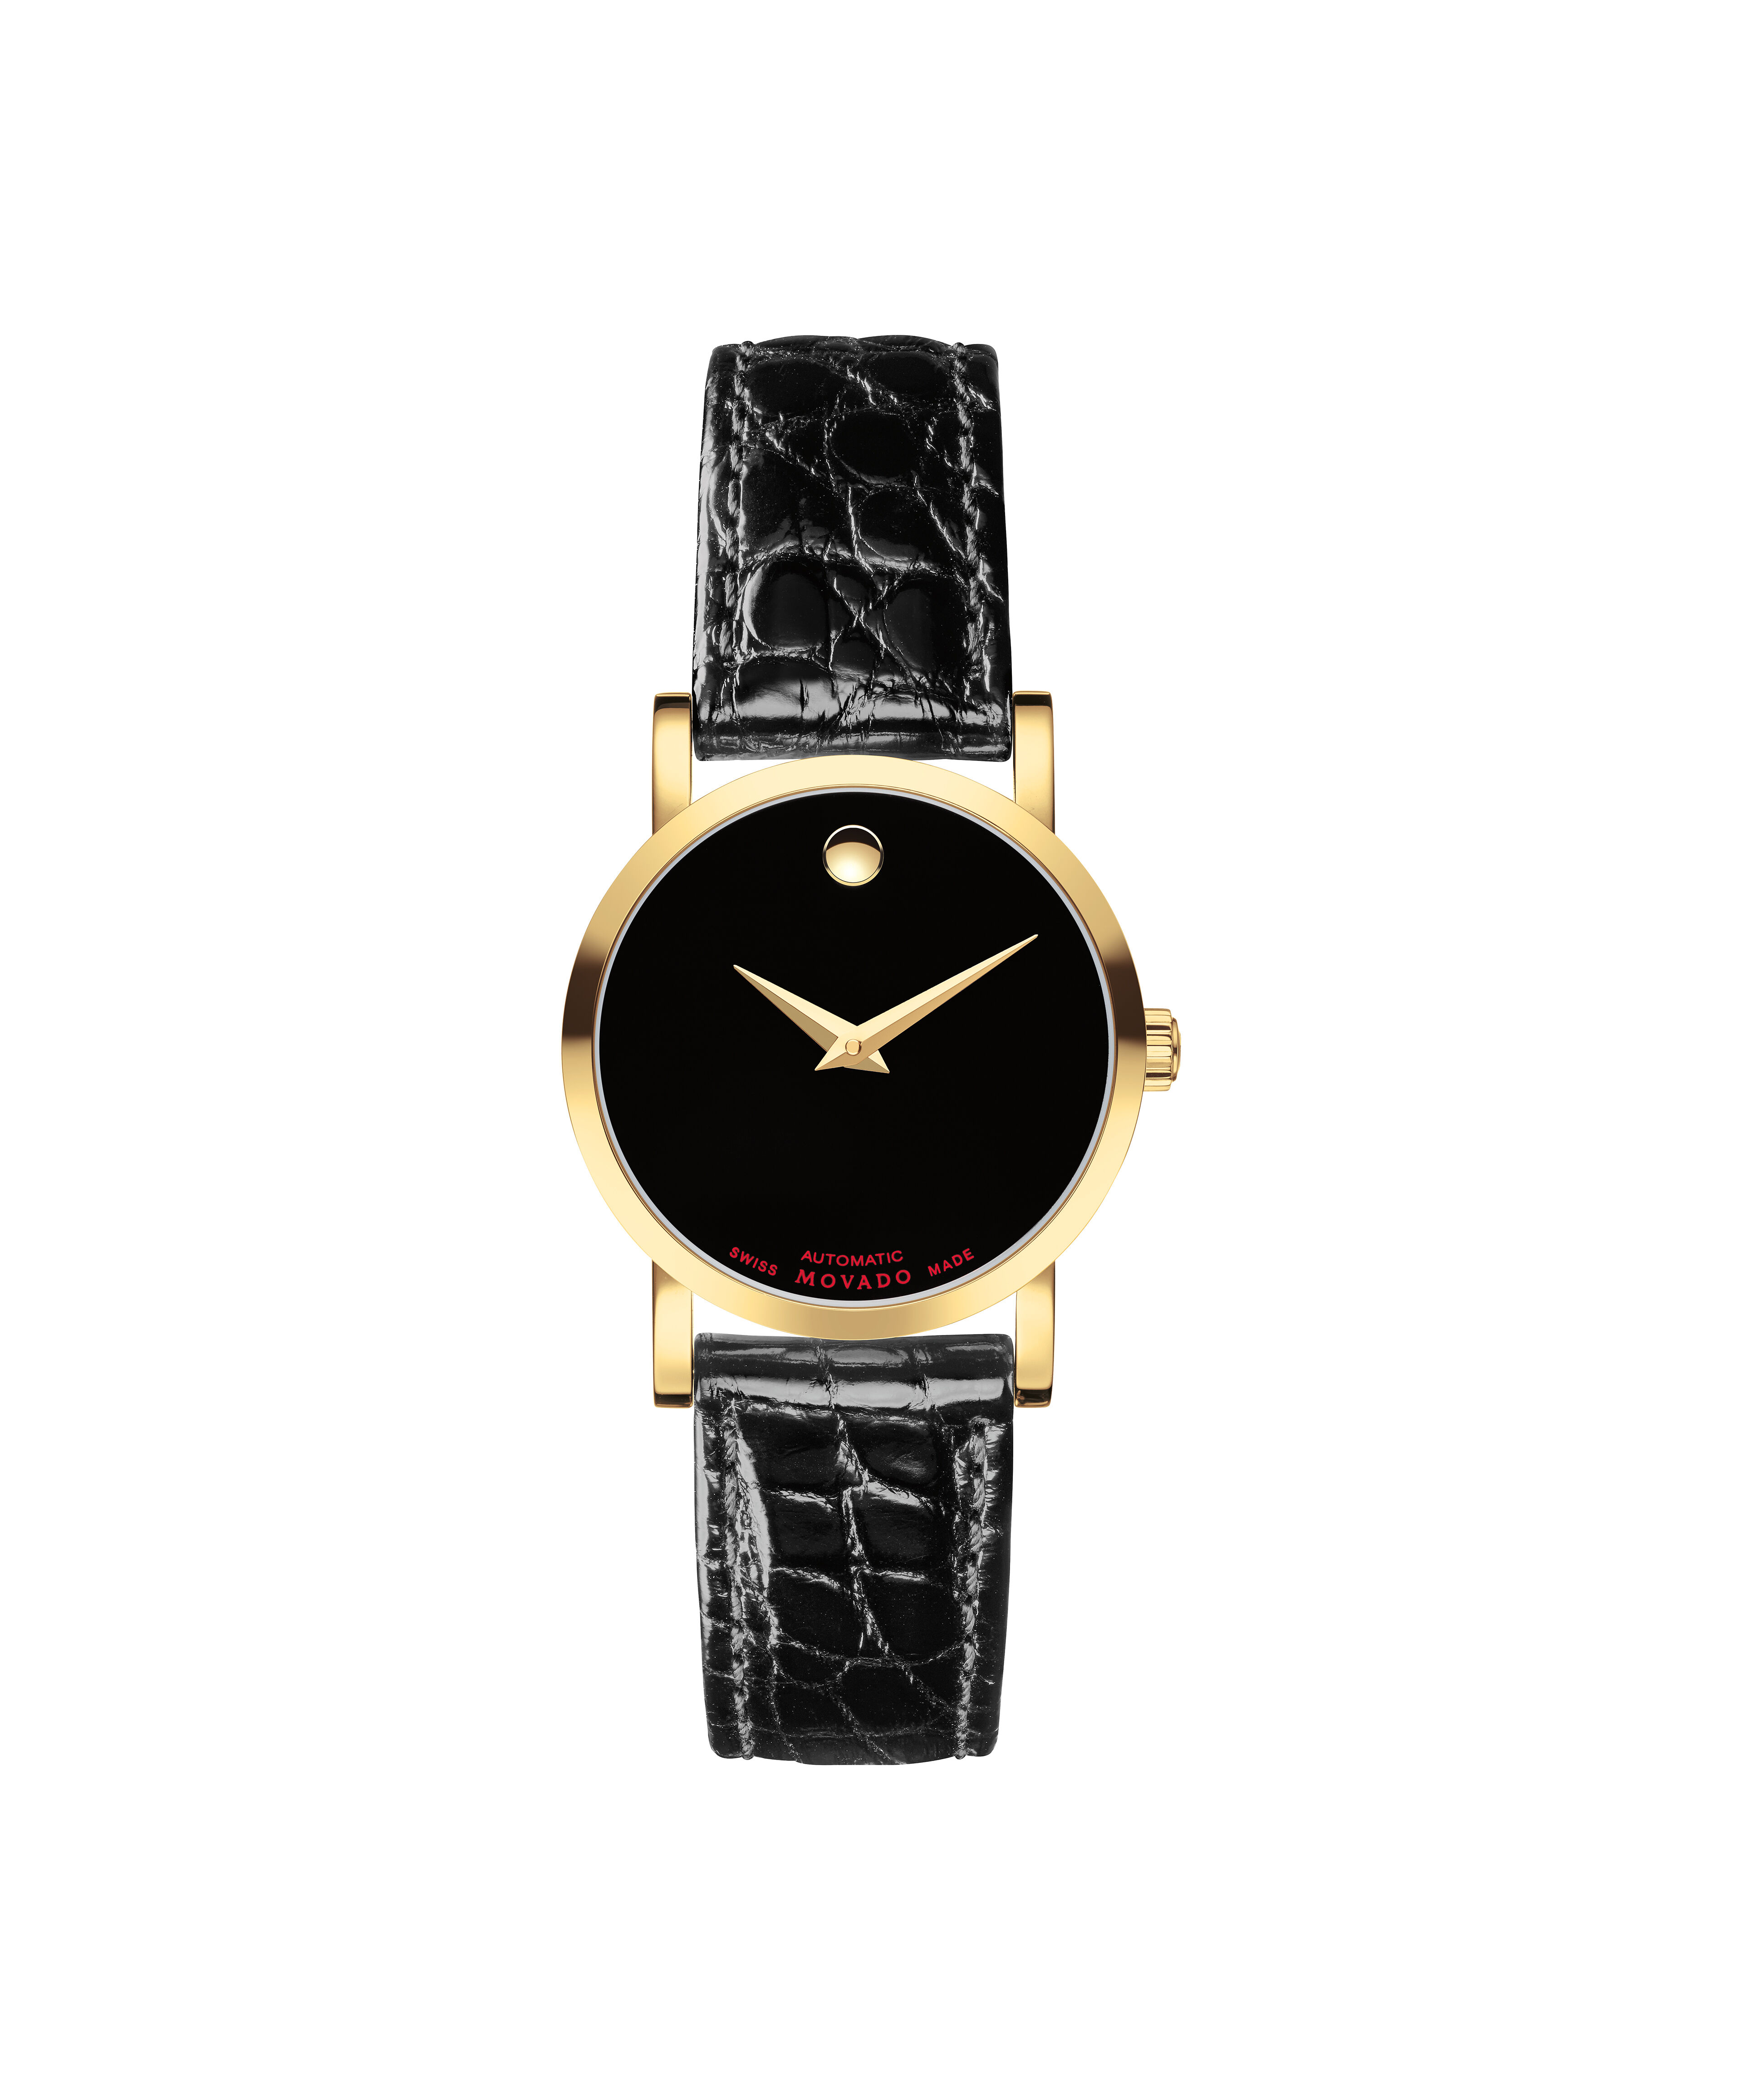 Movado Mobard MOVADO 40.A8.620 Men's Watch Hand-wound WhiteMovado Mobard SS × Leather